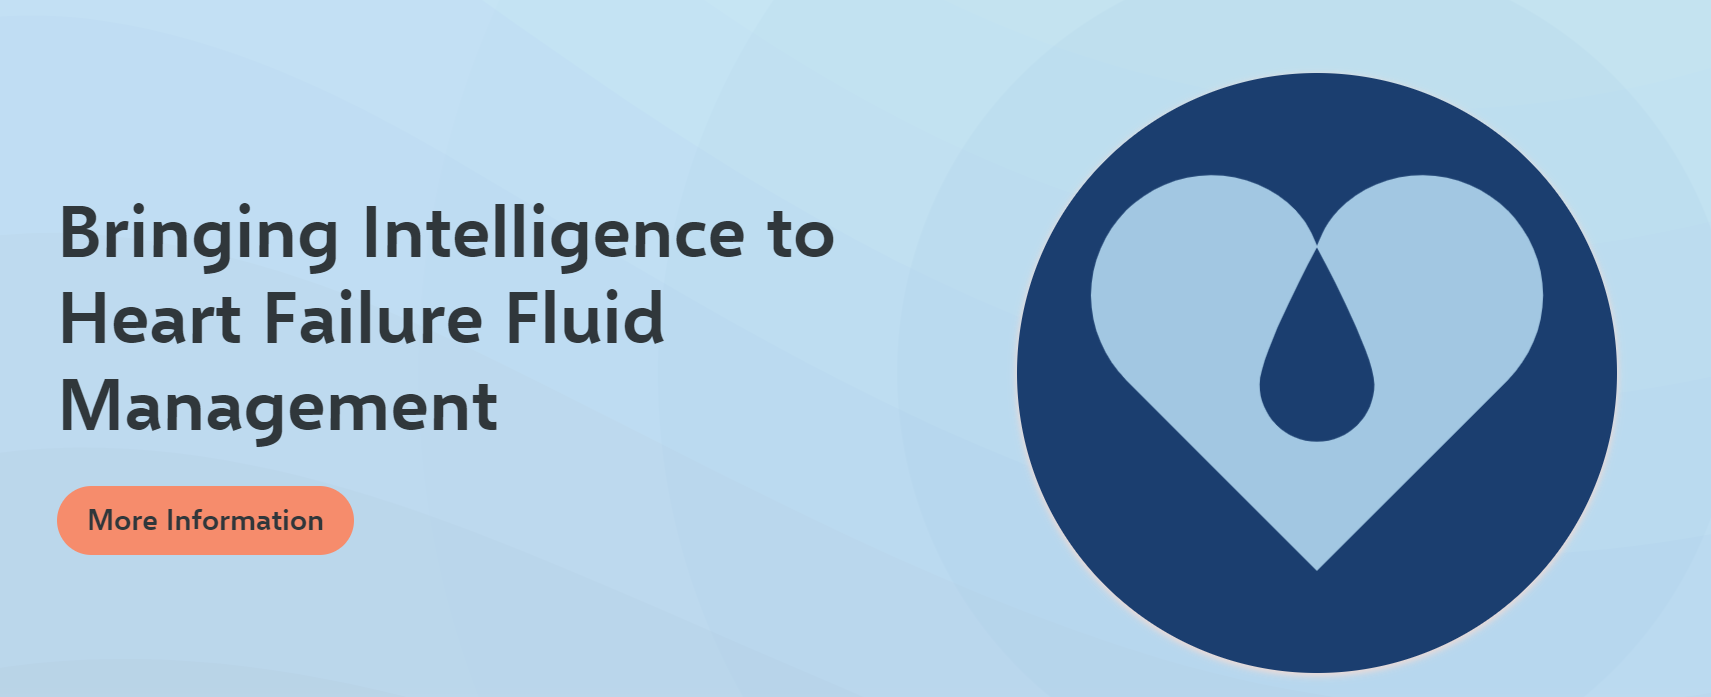 Reprieve Cardiovascular Nabs $42M to Expand Intelligent Fluid Management for Heart Failure